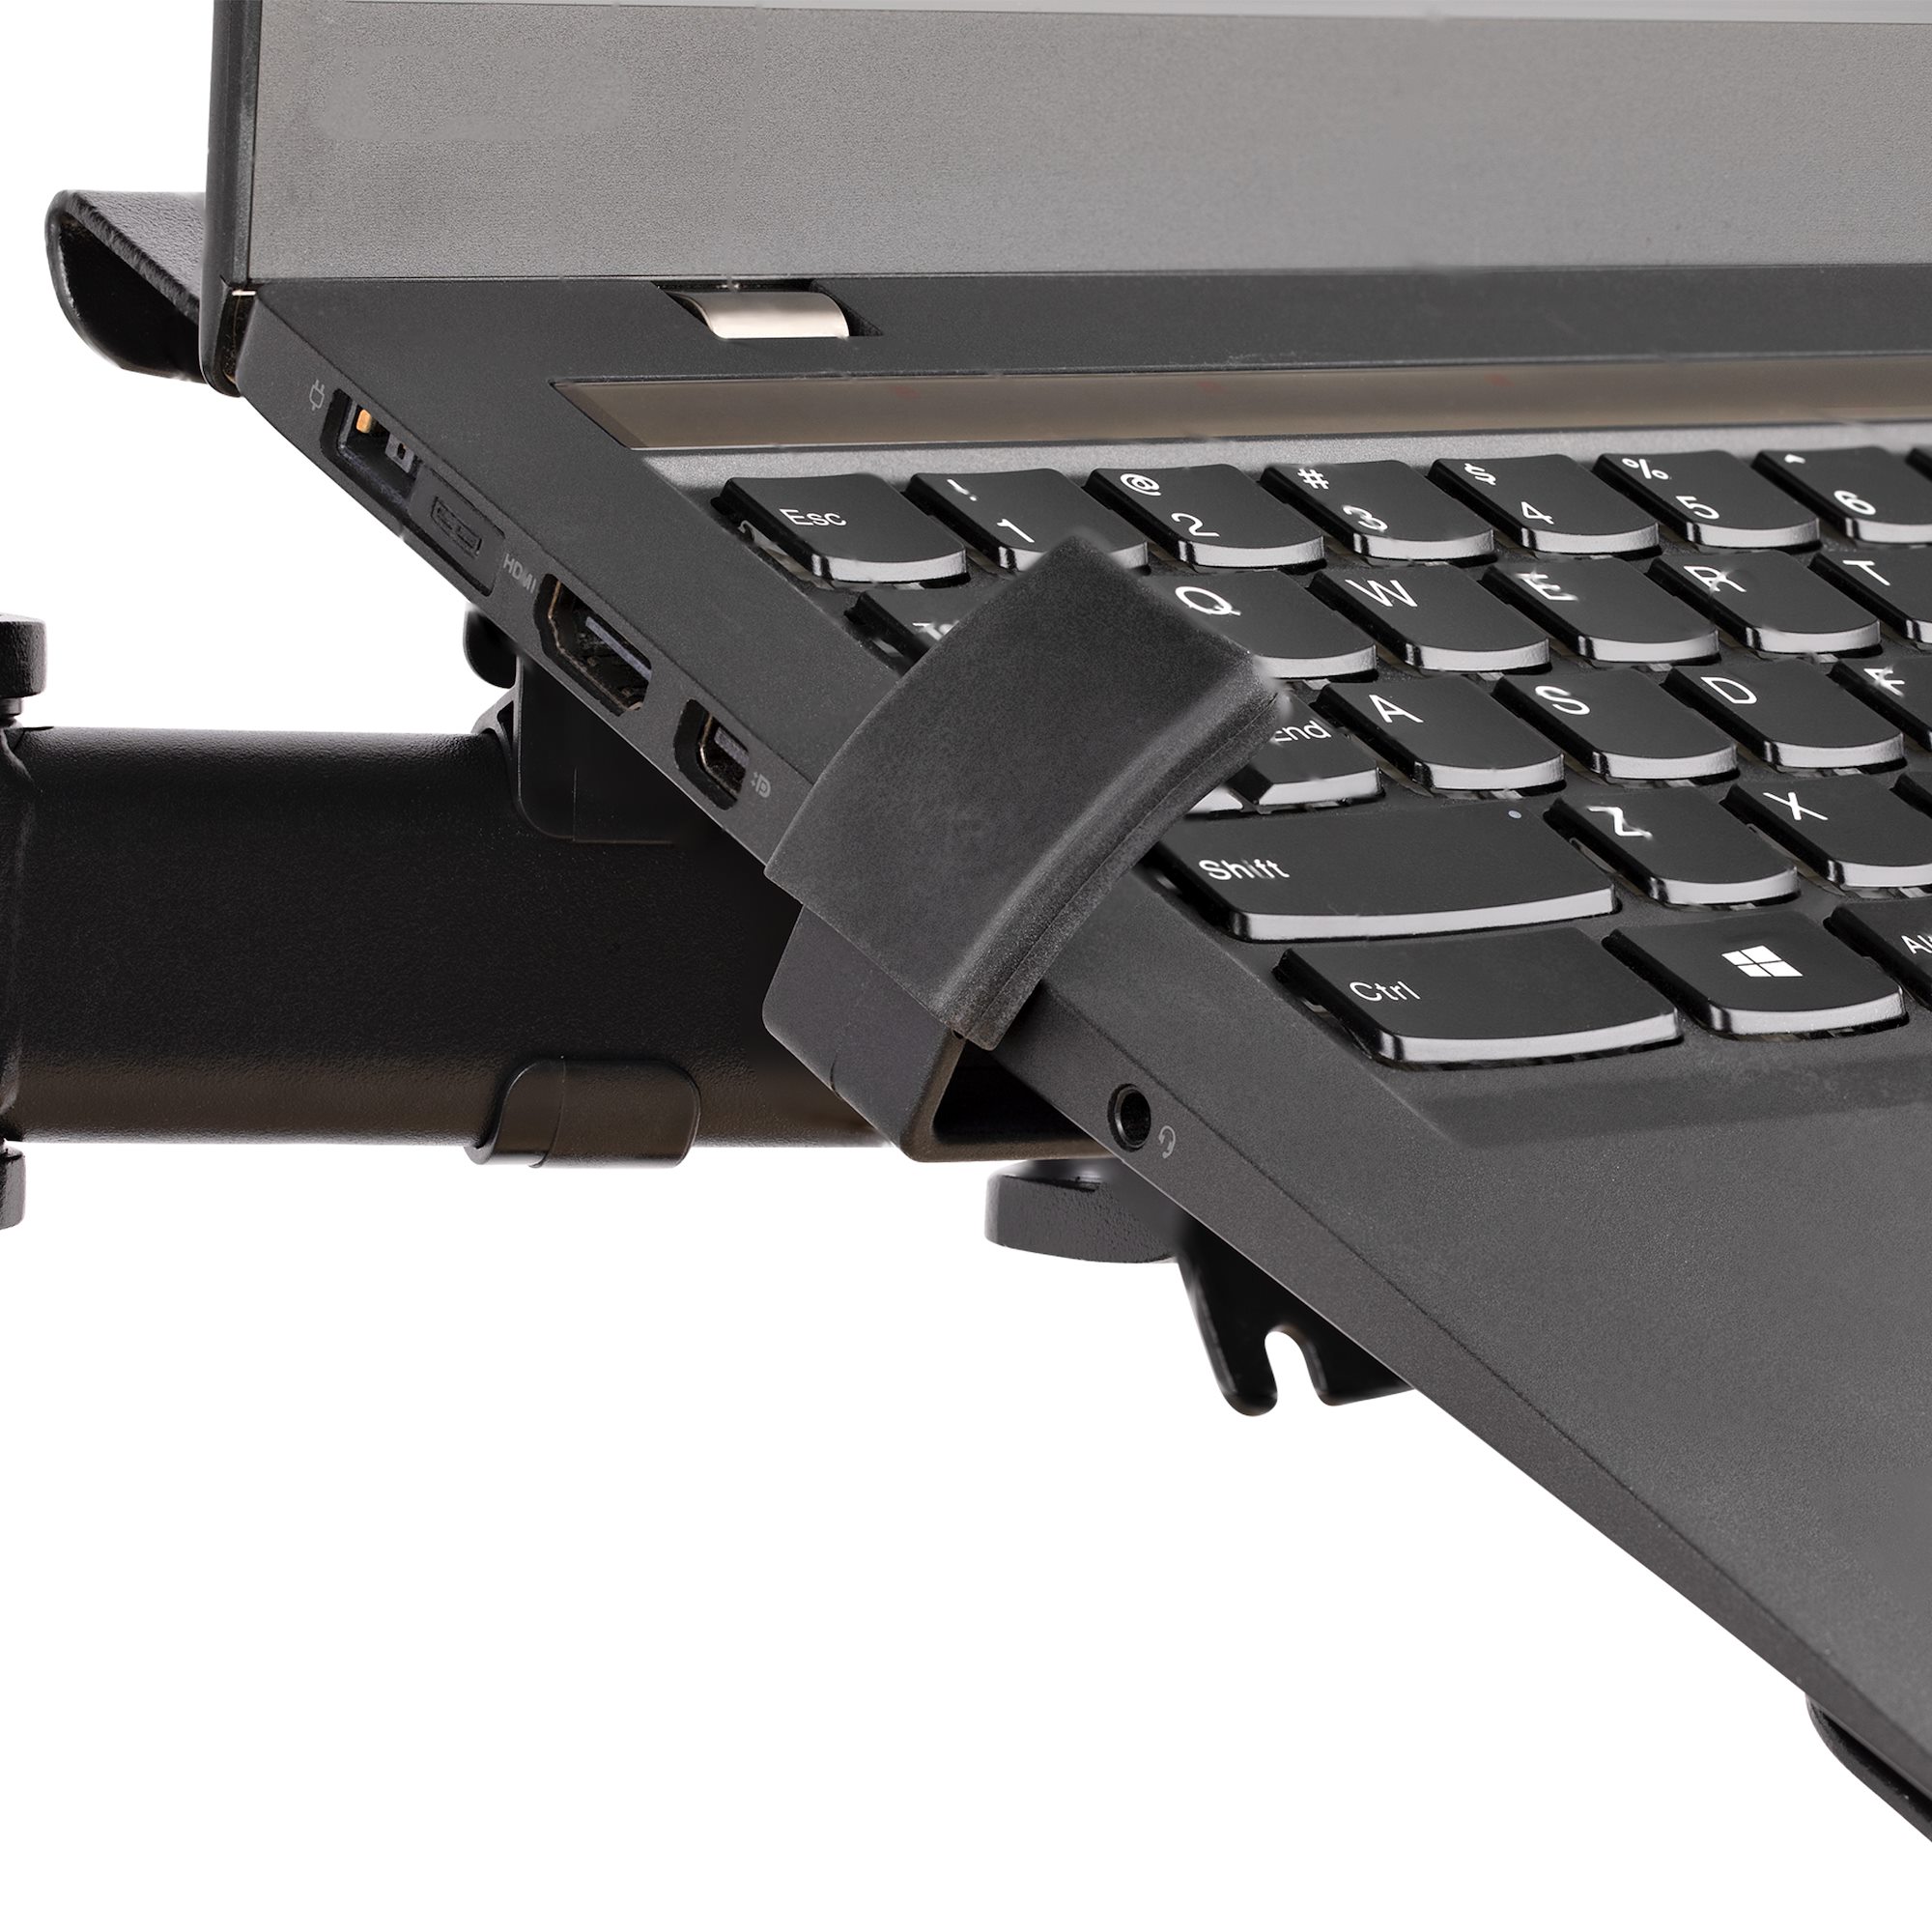 Monitor Arm with VESA Laptop Tray, For a Laptop (4.5kg/9.9lb) and a Single  Display up to 32 (17.6lb/8kg), Black, Vented Tray, Adjustable Laptop Arm